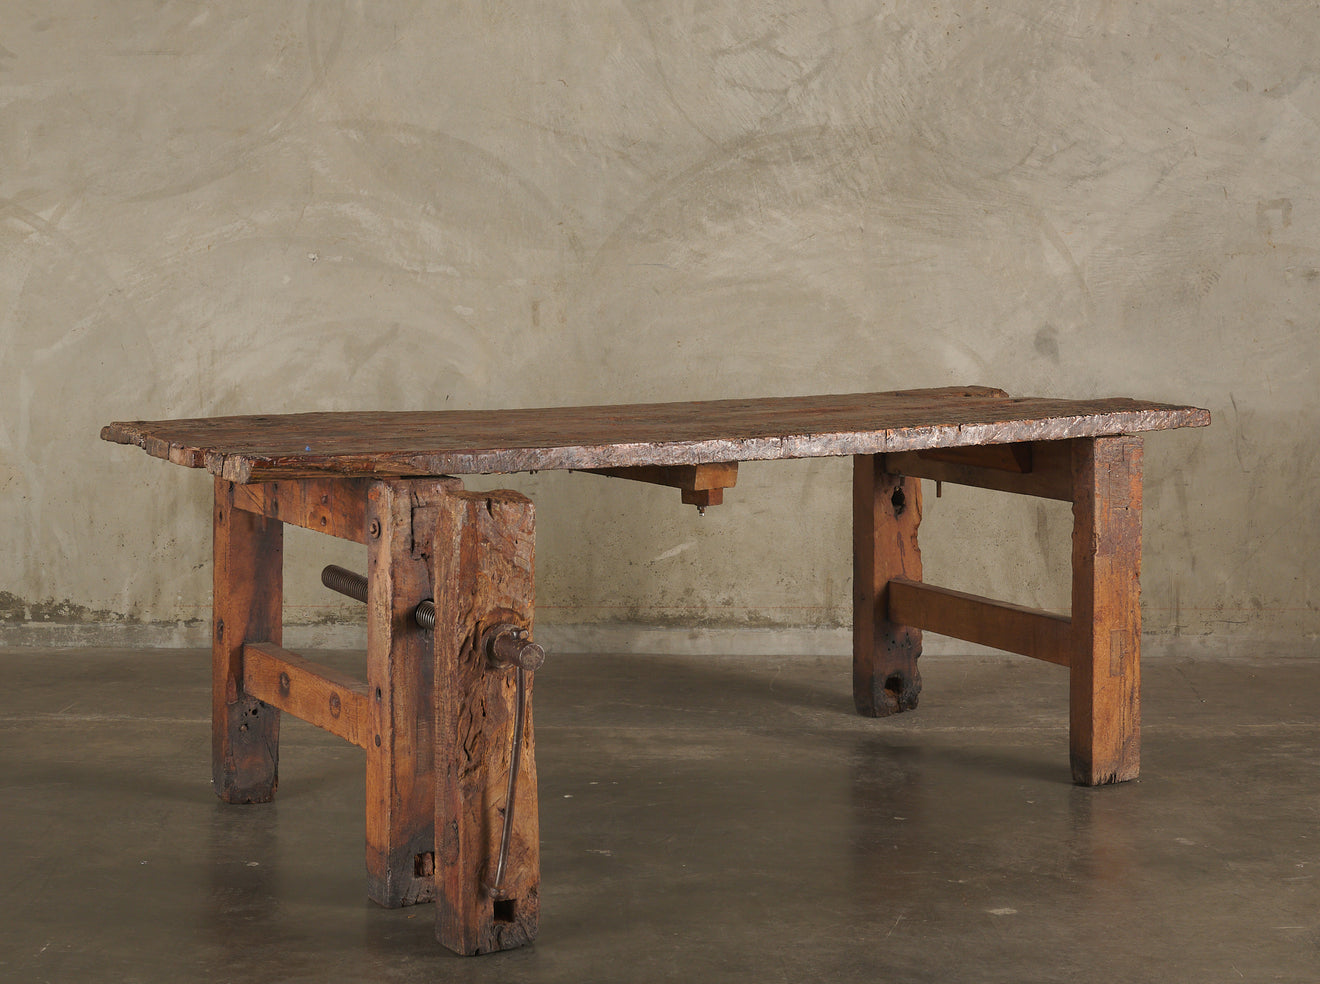 RUSTIC WORK TABLE WITH VICE